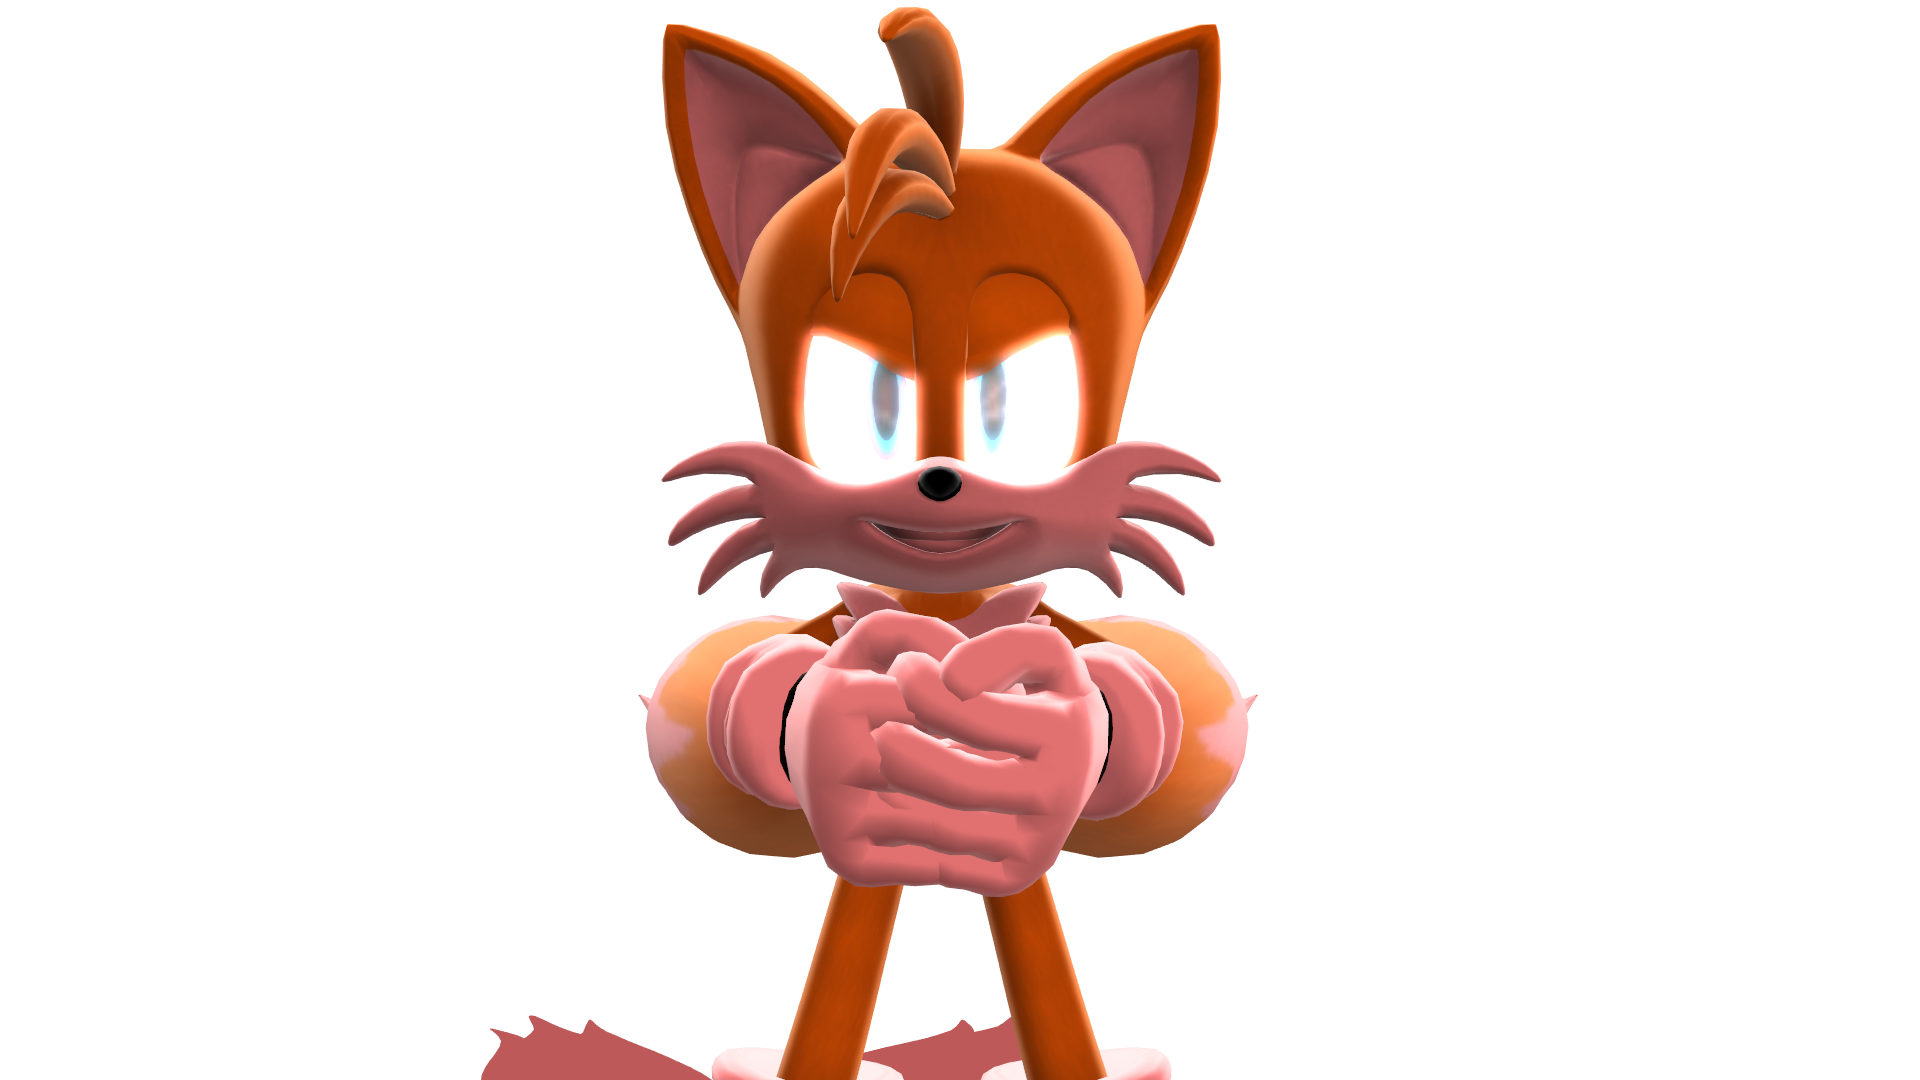 Tails.exe flying by S213413 on DeviantArt